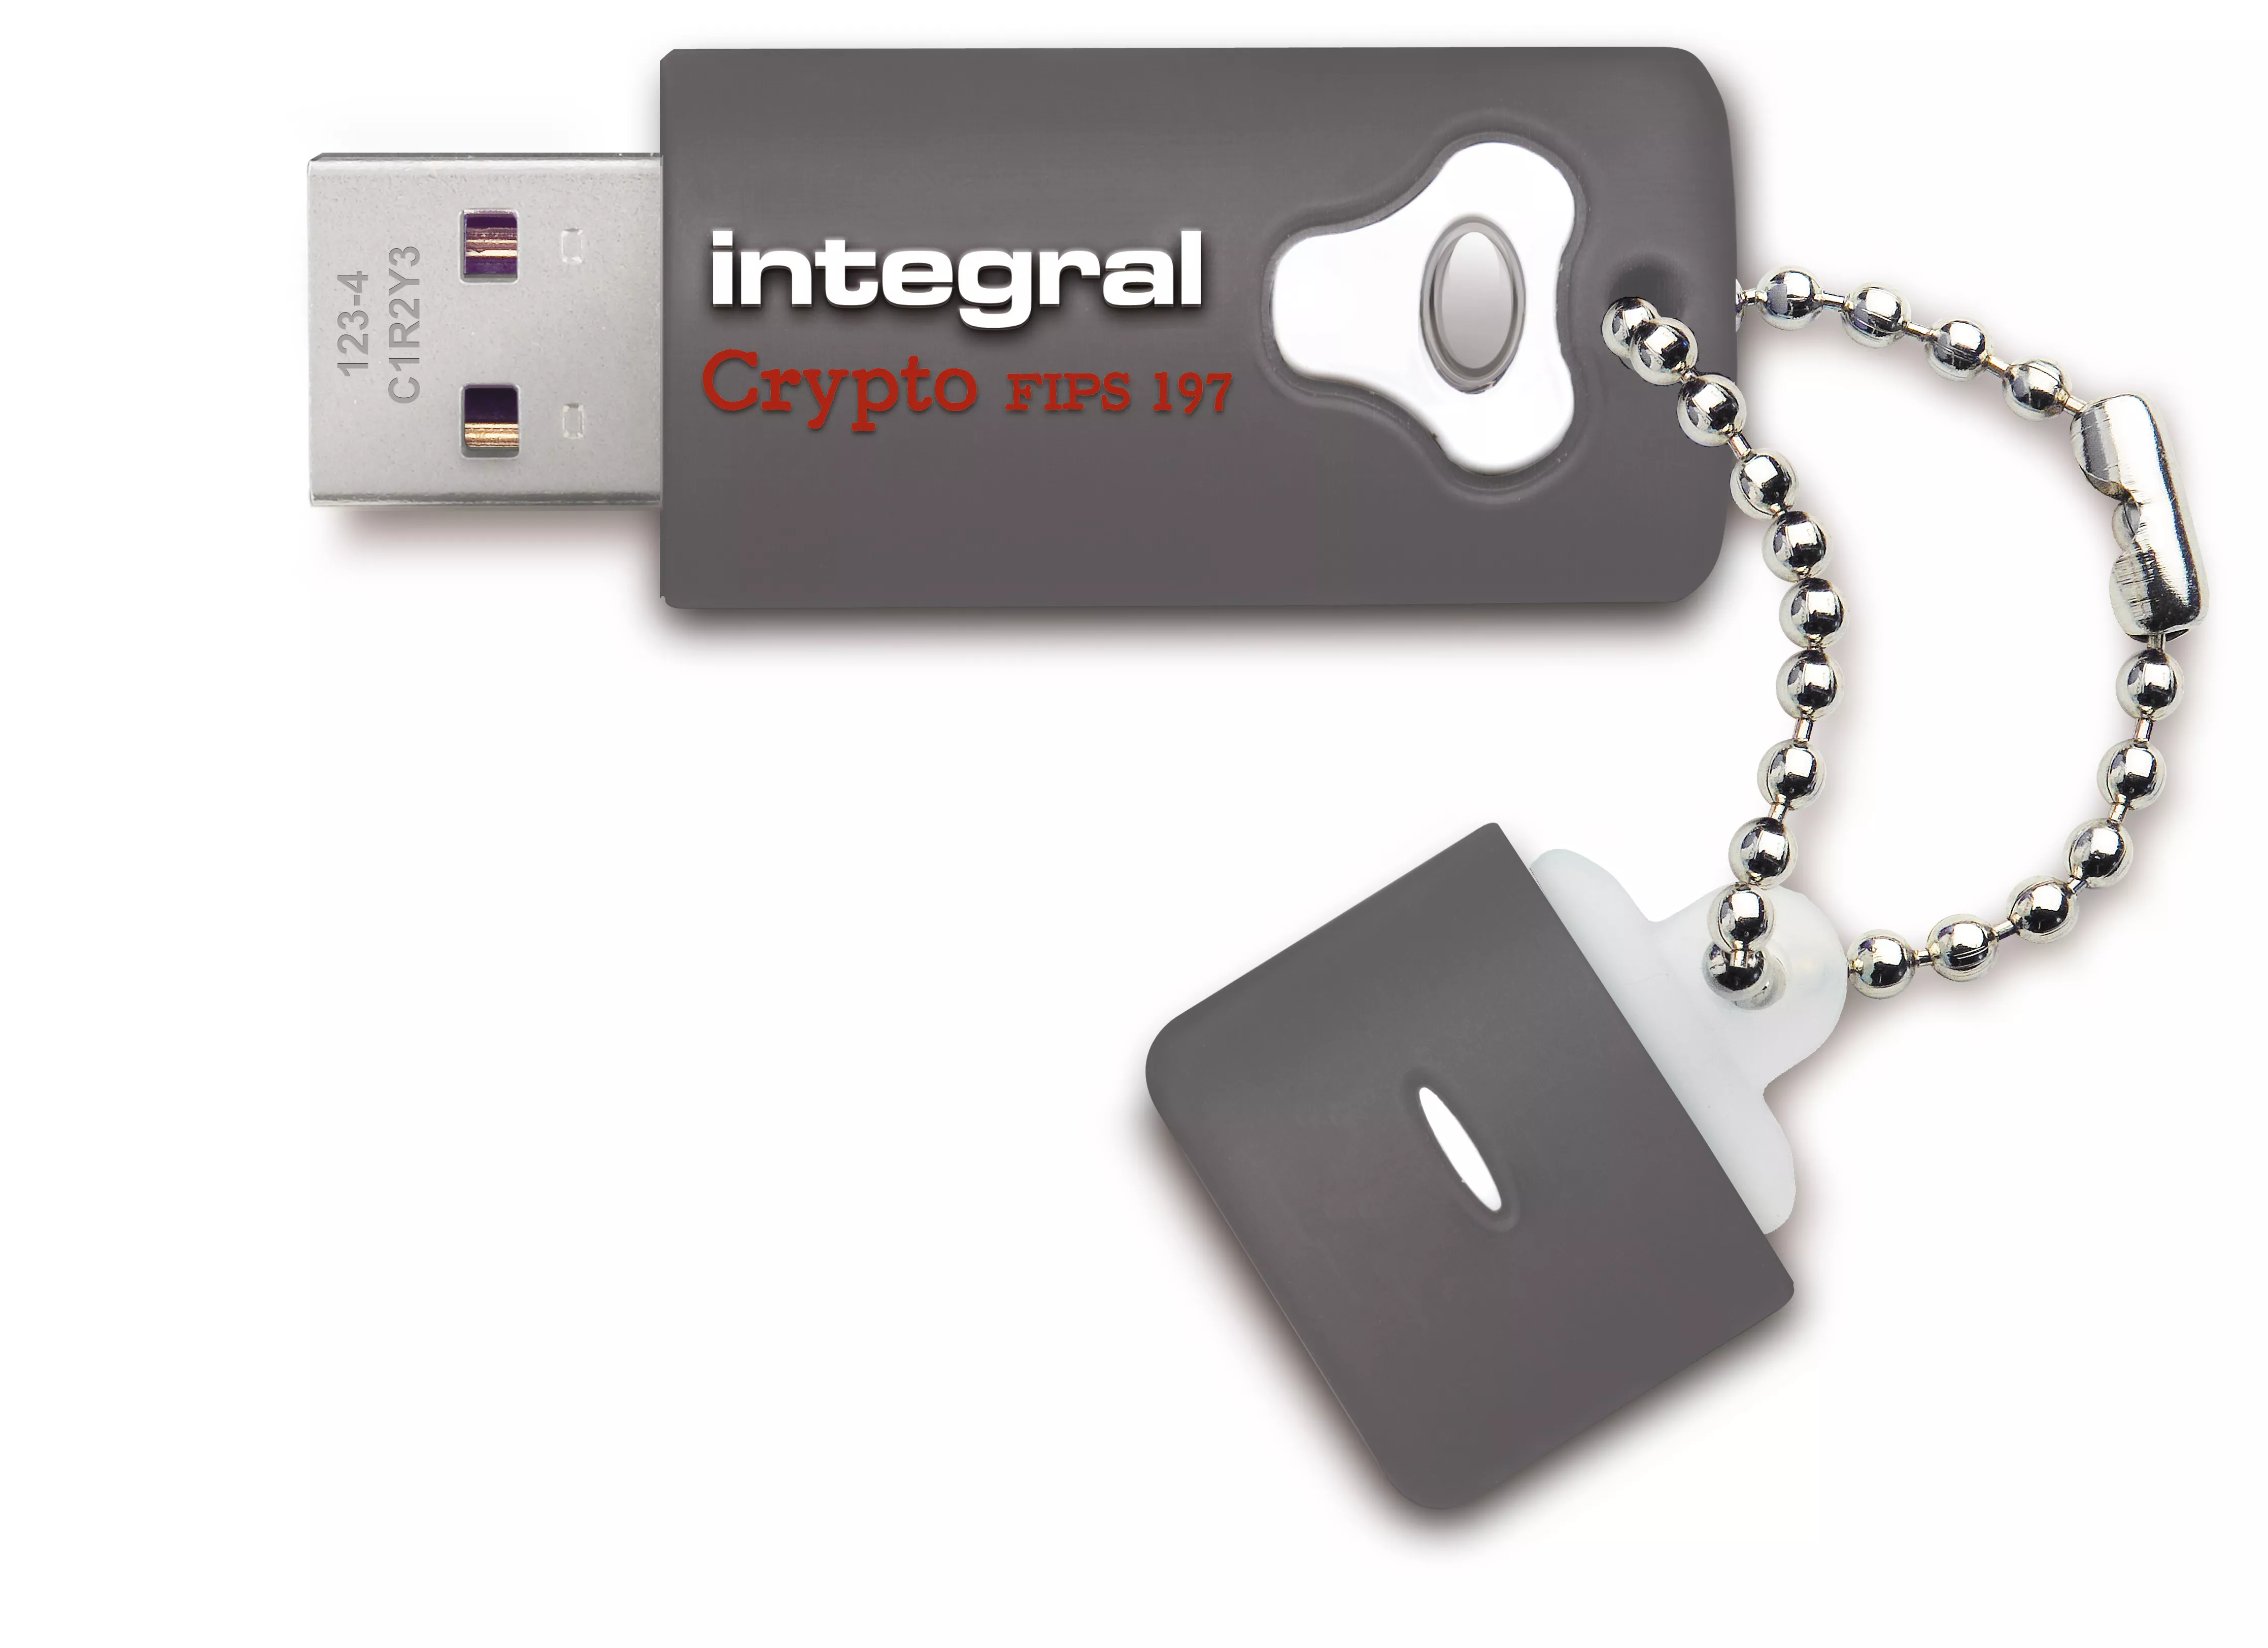 Achat Integral 32GB Crypto Drive FIPS 197 Encrypted USB 3.0 - 5055288430280